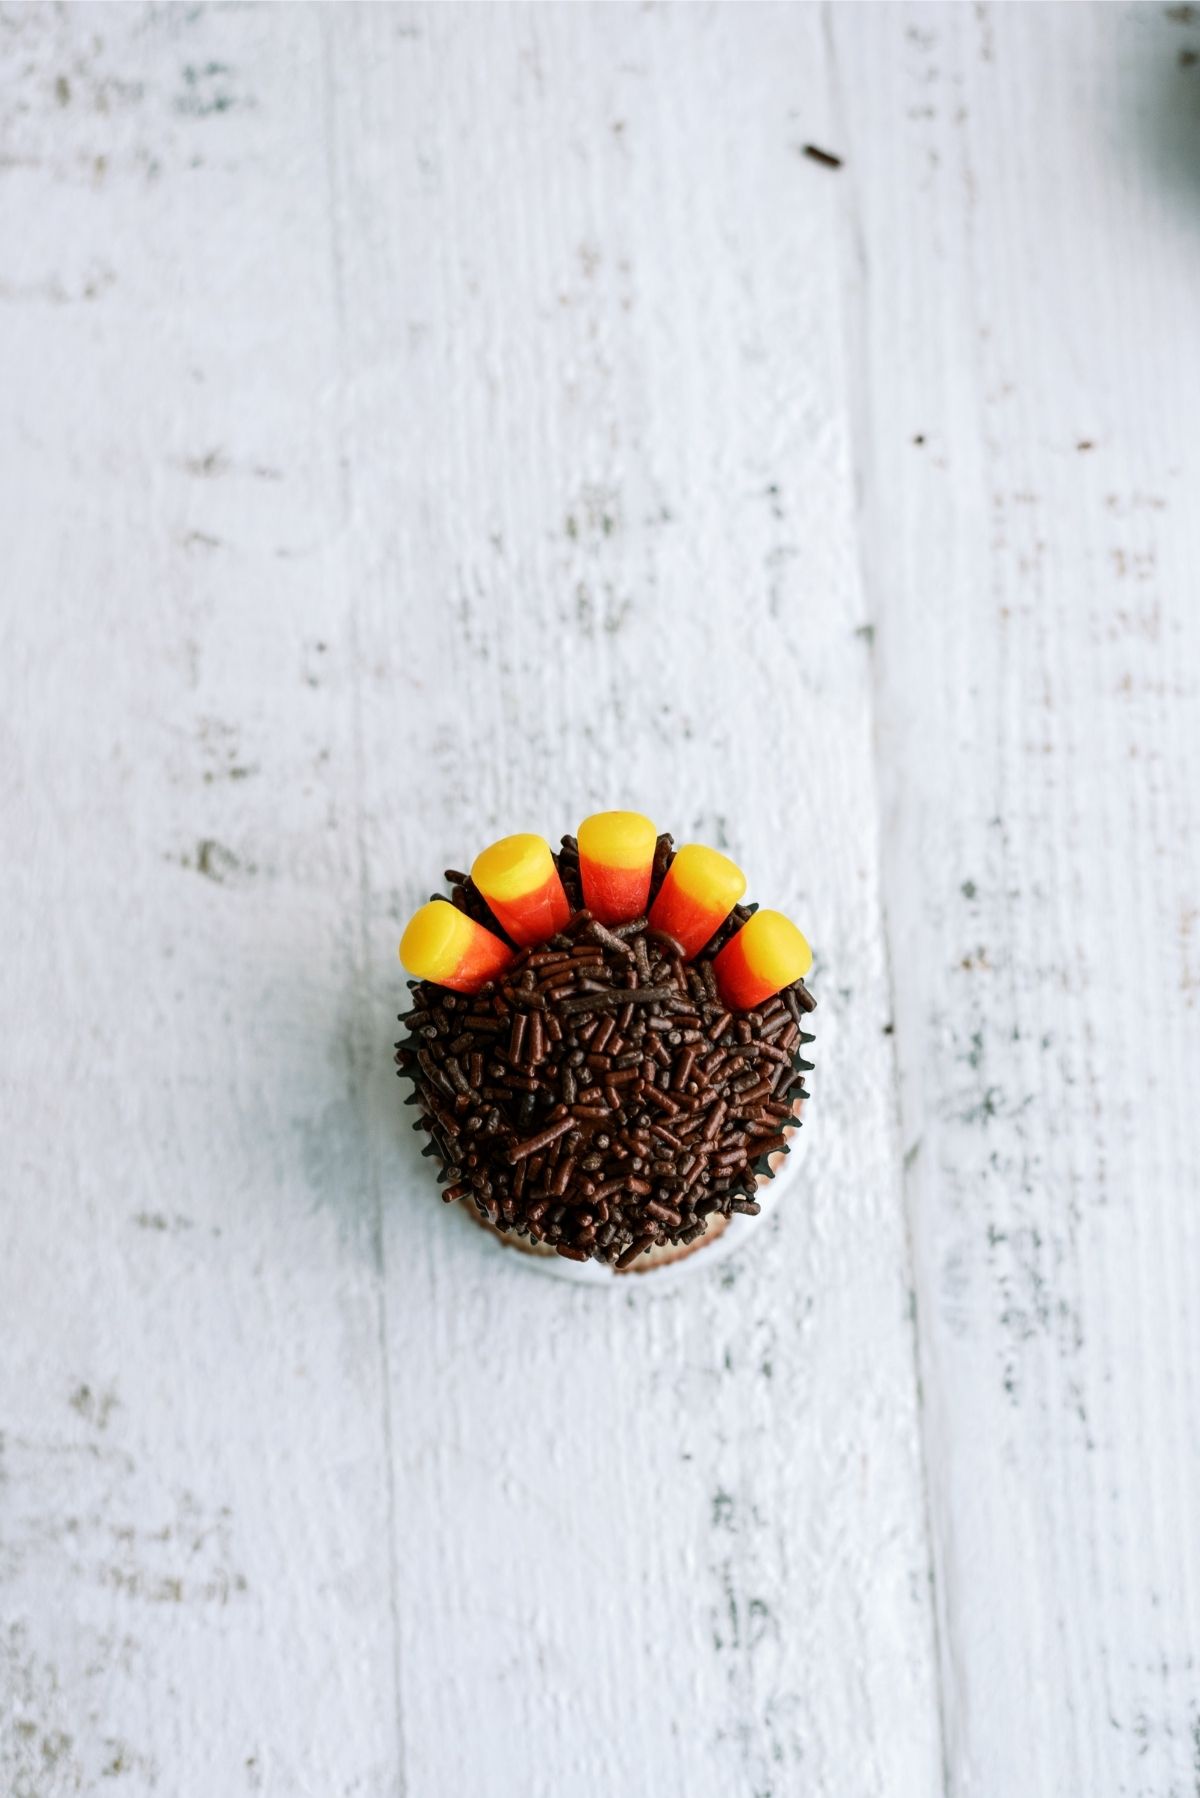 Chocolate cupcake with sprinkles and 5 candycorn pressed into it.